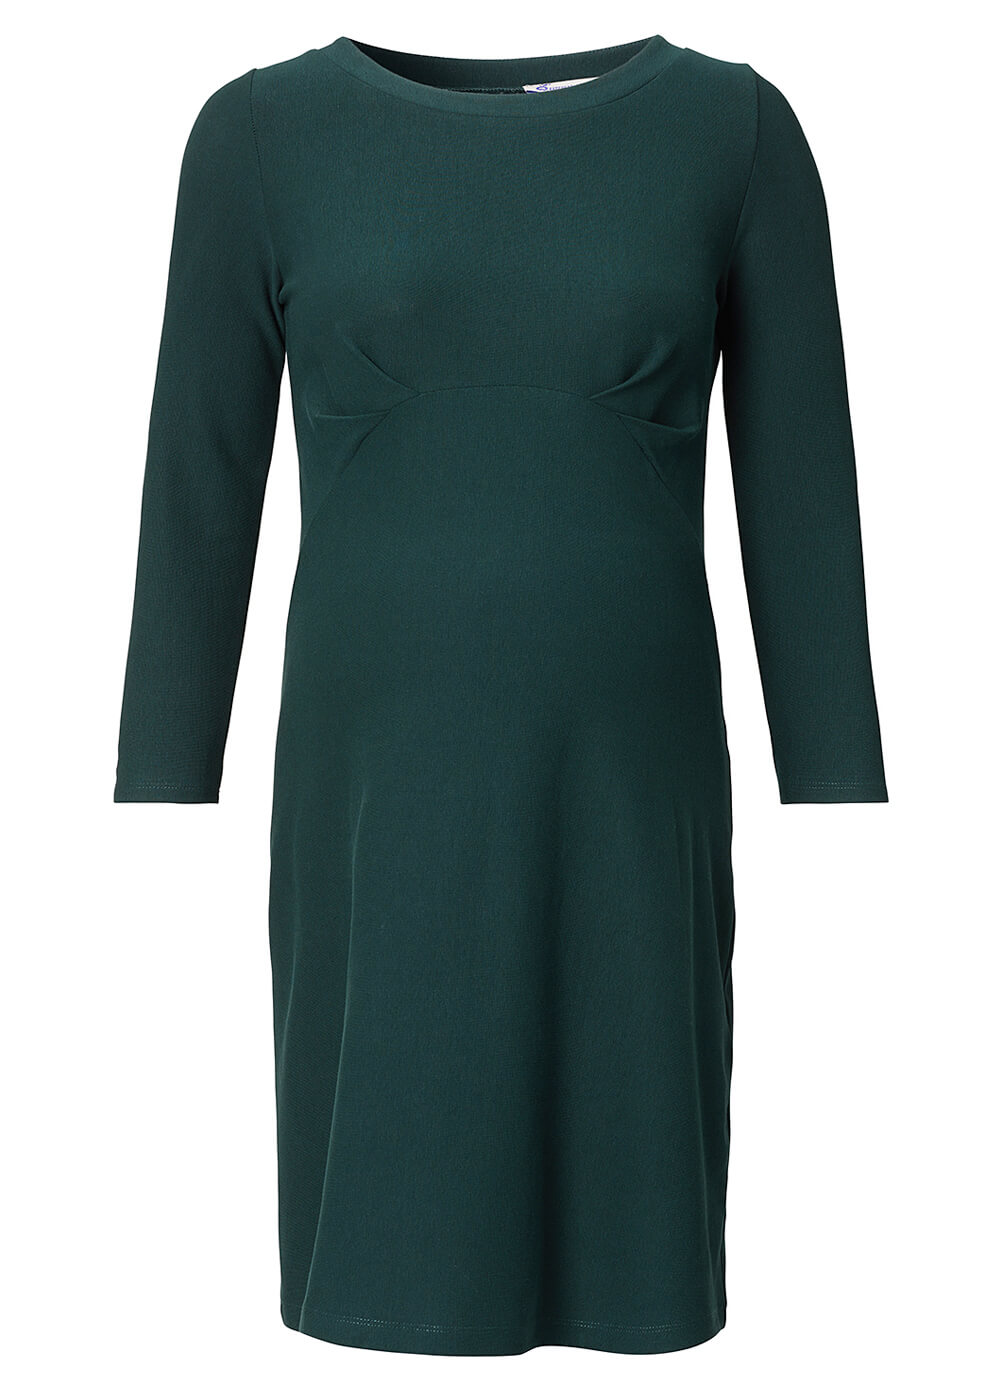 Elegant Contoured Maternity Dress in Green by Queen mum